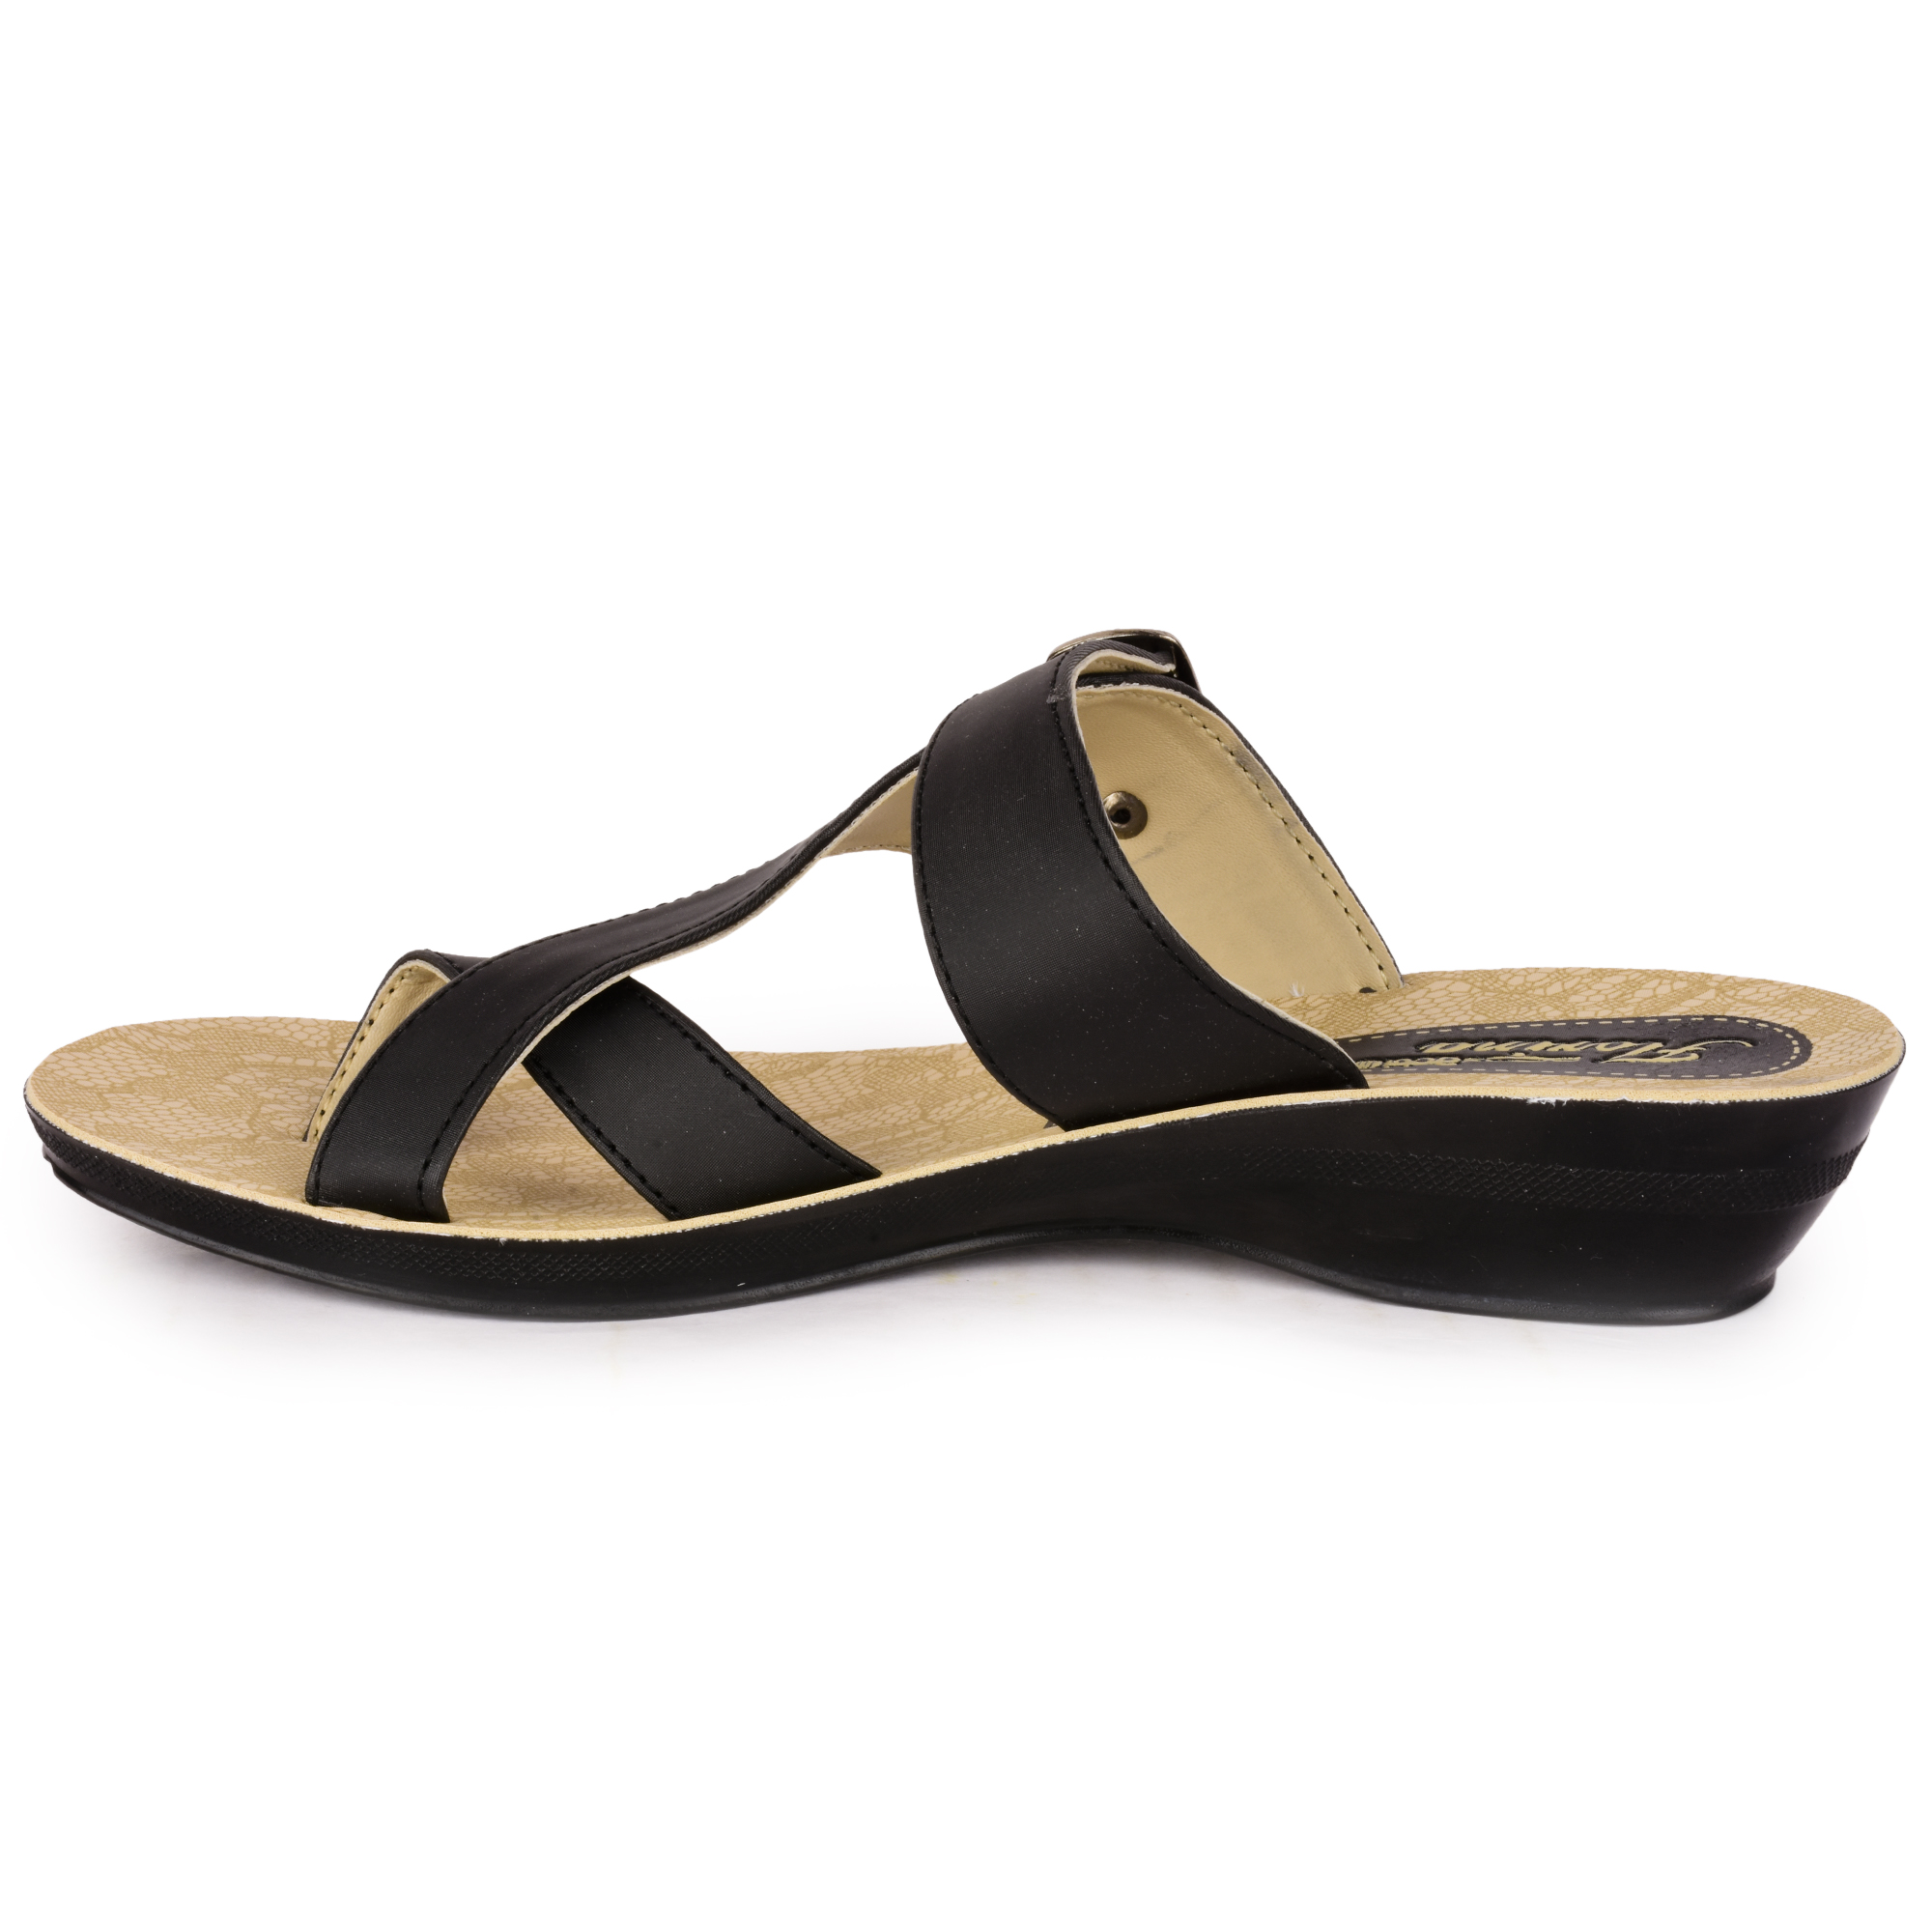 Buy Action shoes Women Slippers PL-4217-BLACK Online @ ₹279 from ShopClues